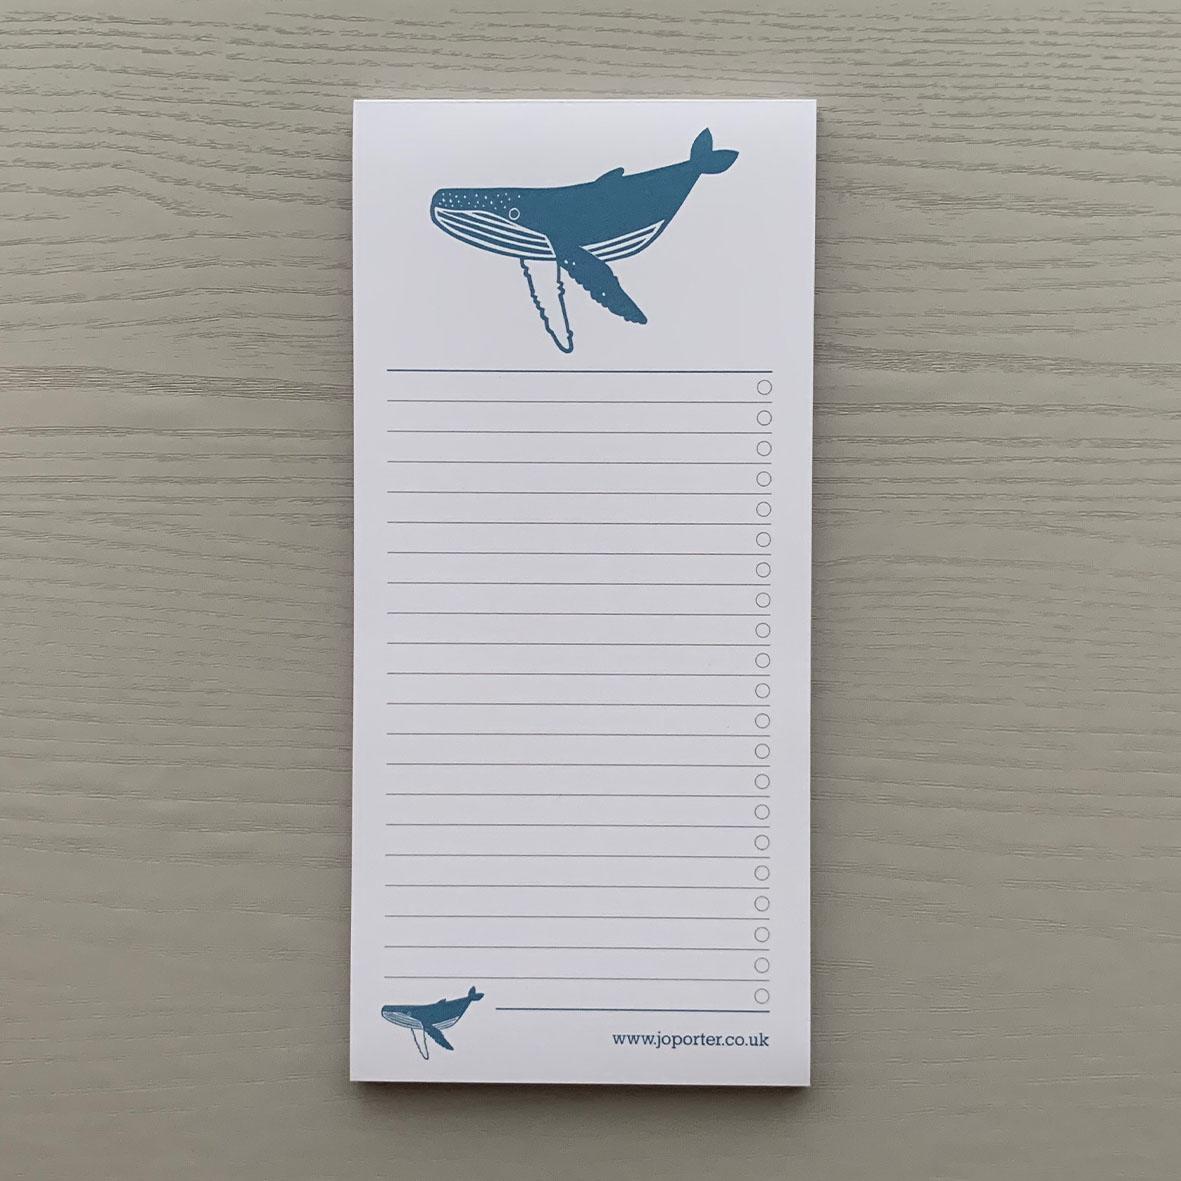 All Notepads